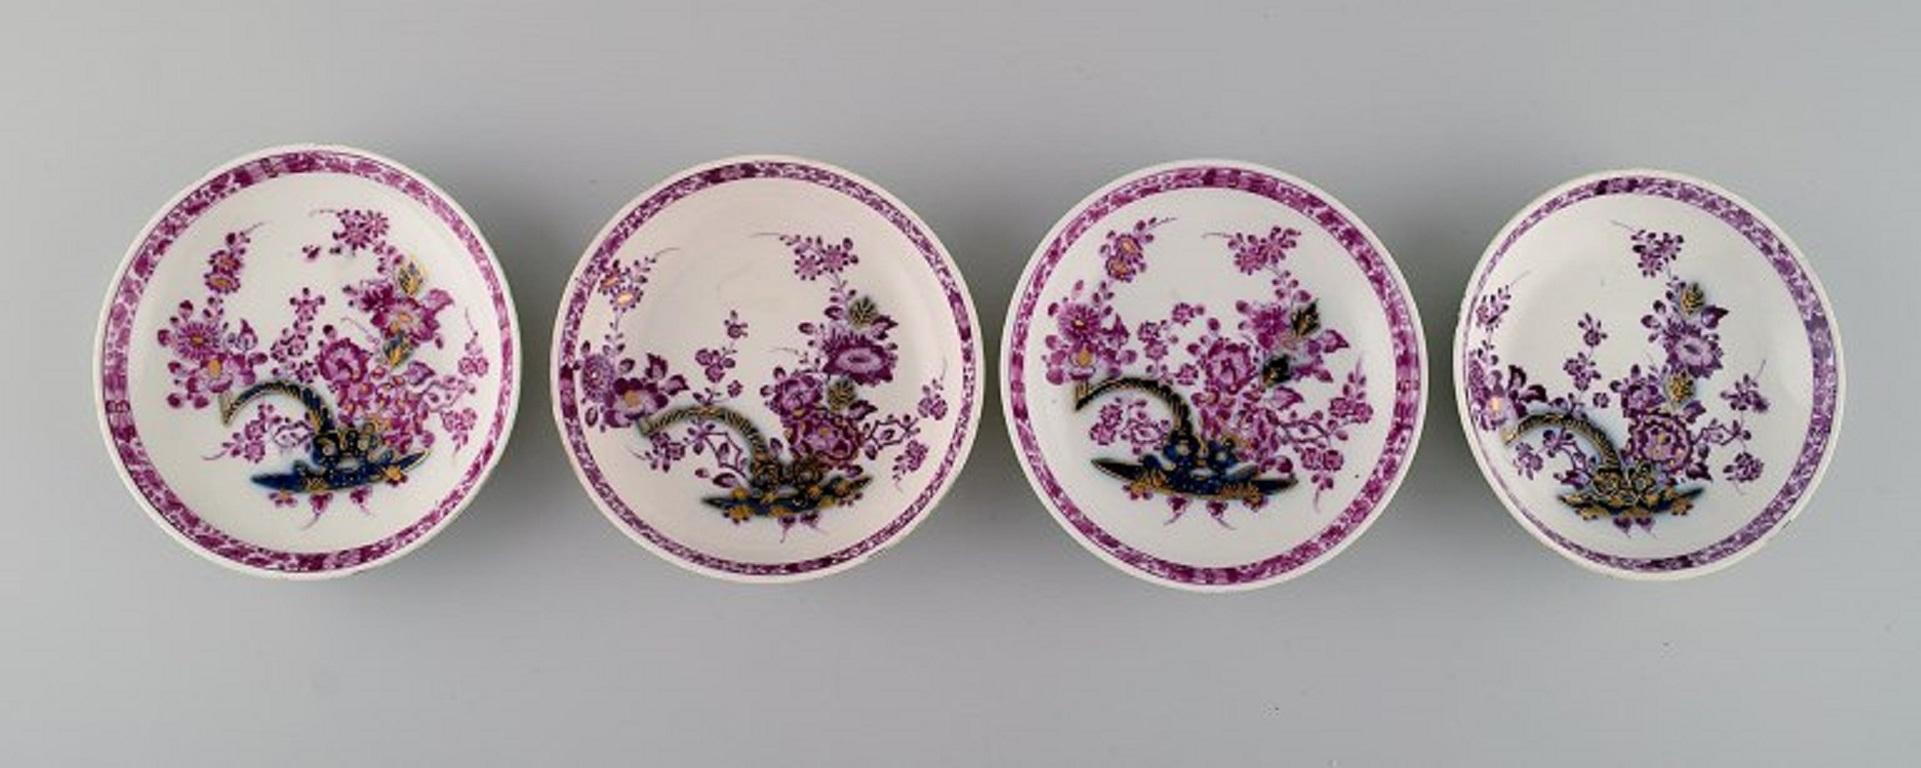 Four antique Meissen teacups with saucers in hand-painted porcelain. 
Purple flowers and gold decoration. 
Museum quality, approx. 1740.
The cup measures: 7.5 x 4.2 cm.
Saucer measures: 12.2 x 2.5 cm.
In excellent condition.
Stamped.
1st